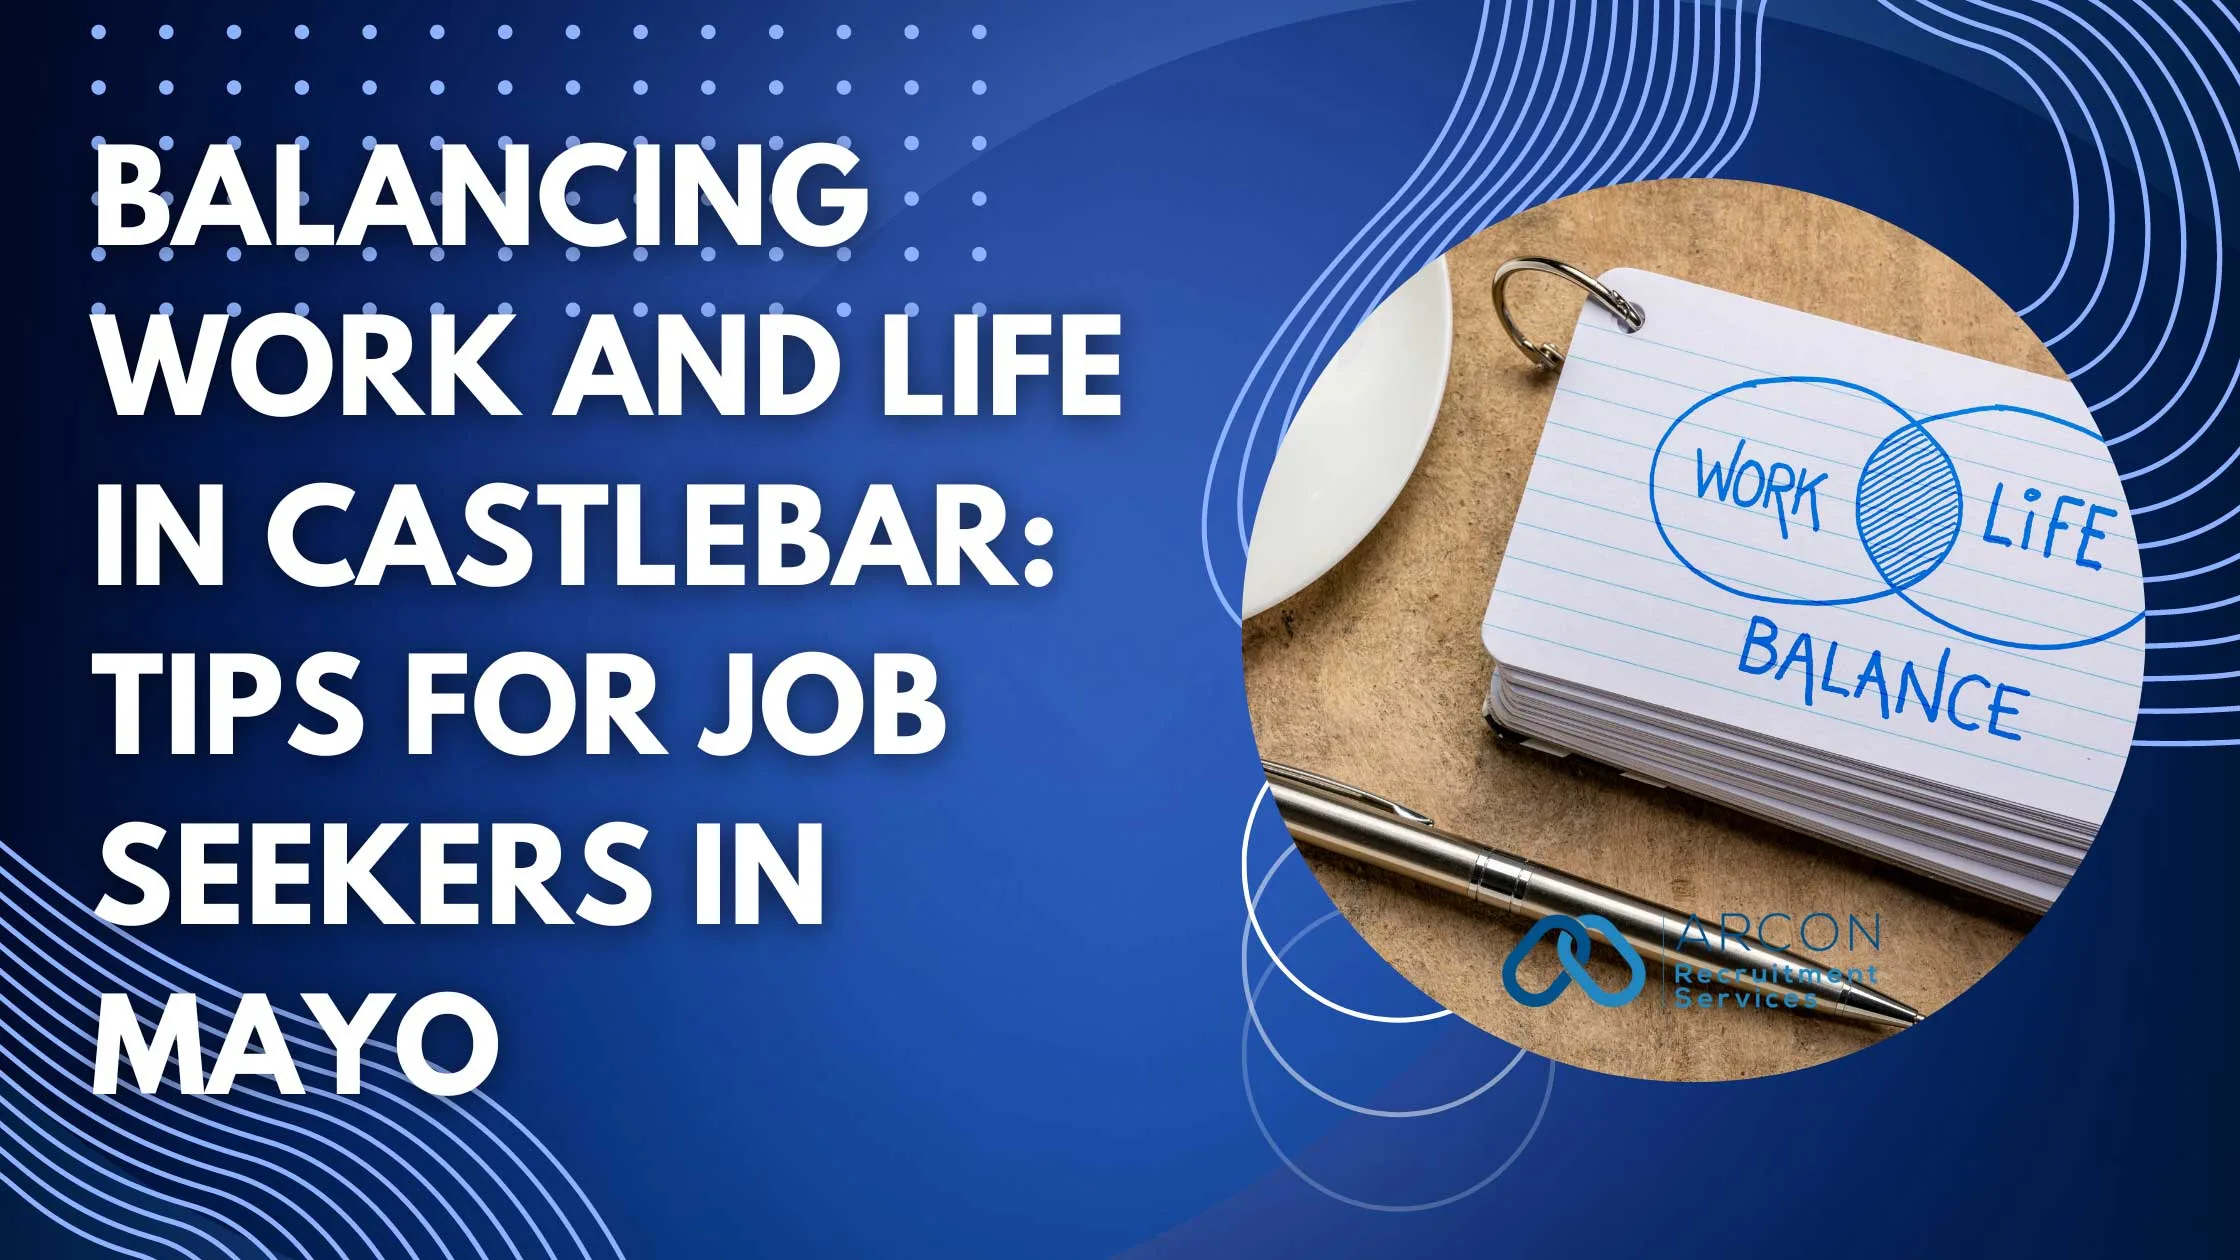 Balancing Work and Life in Castlebar: Tips for Job Seekers in Mayo